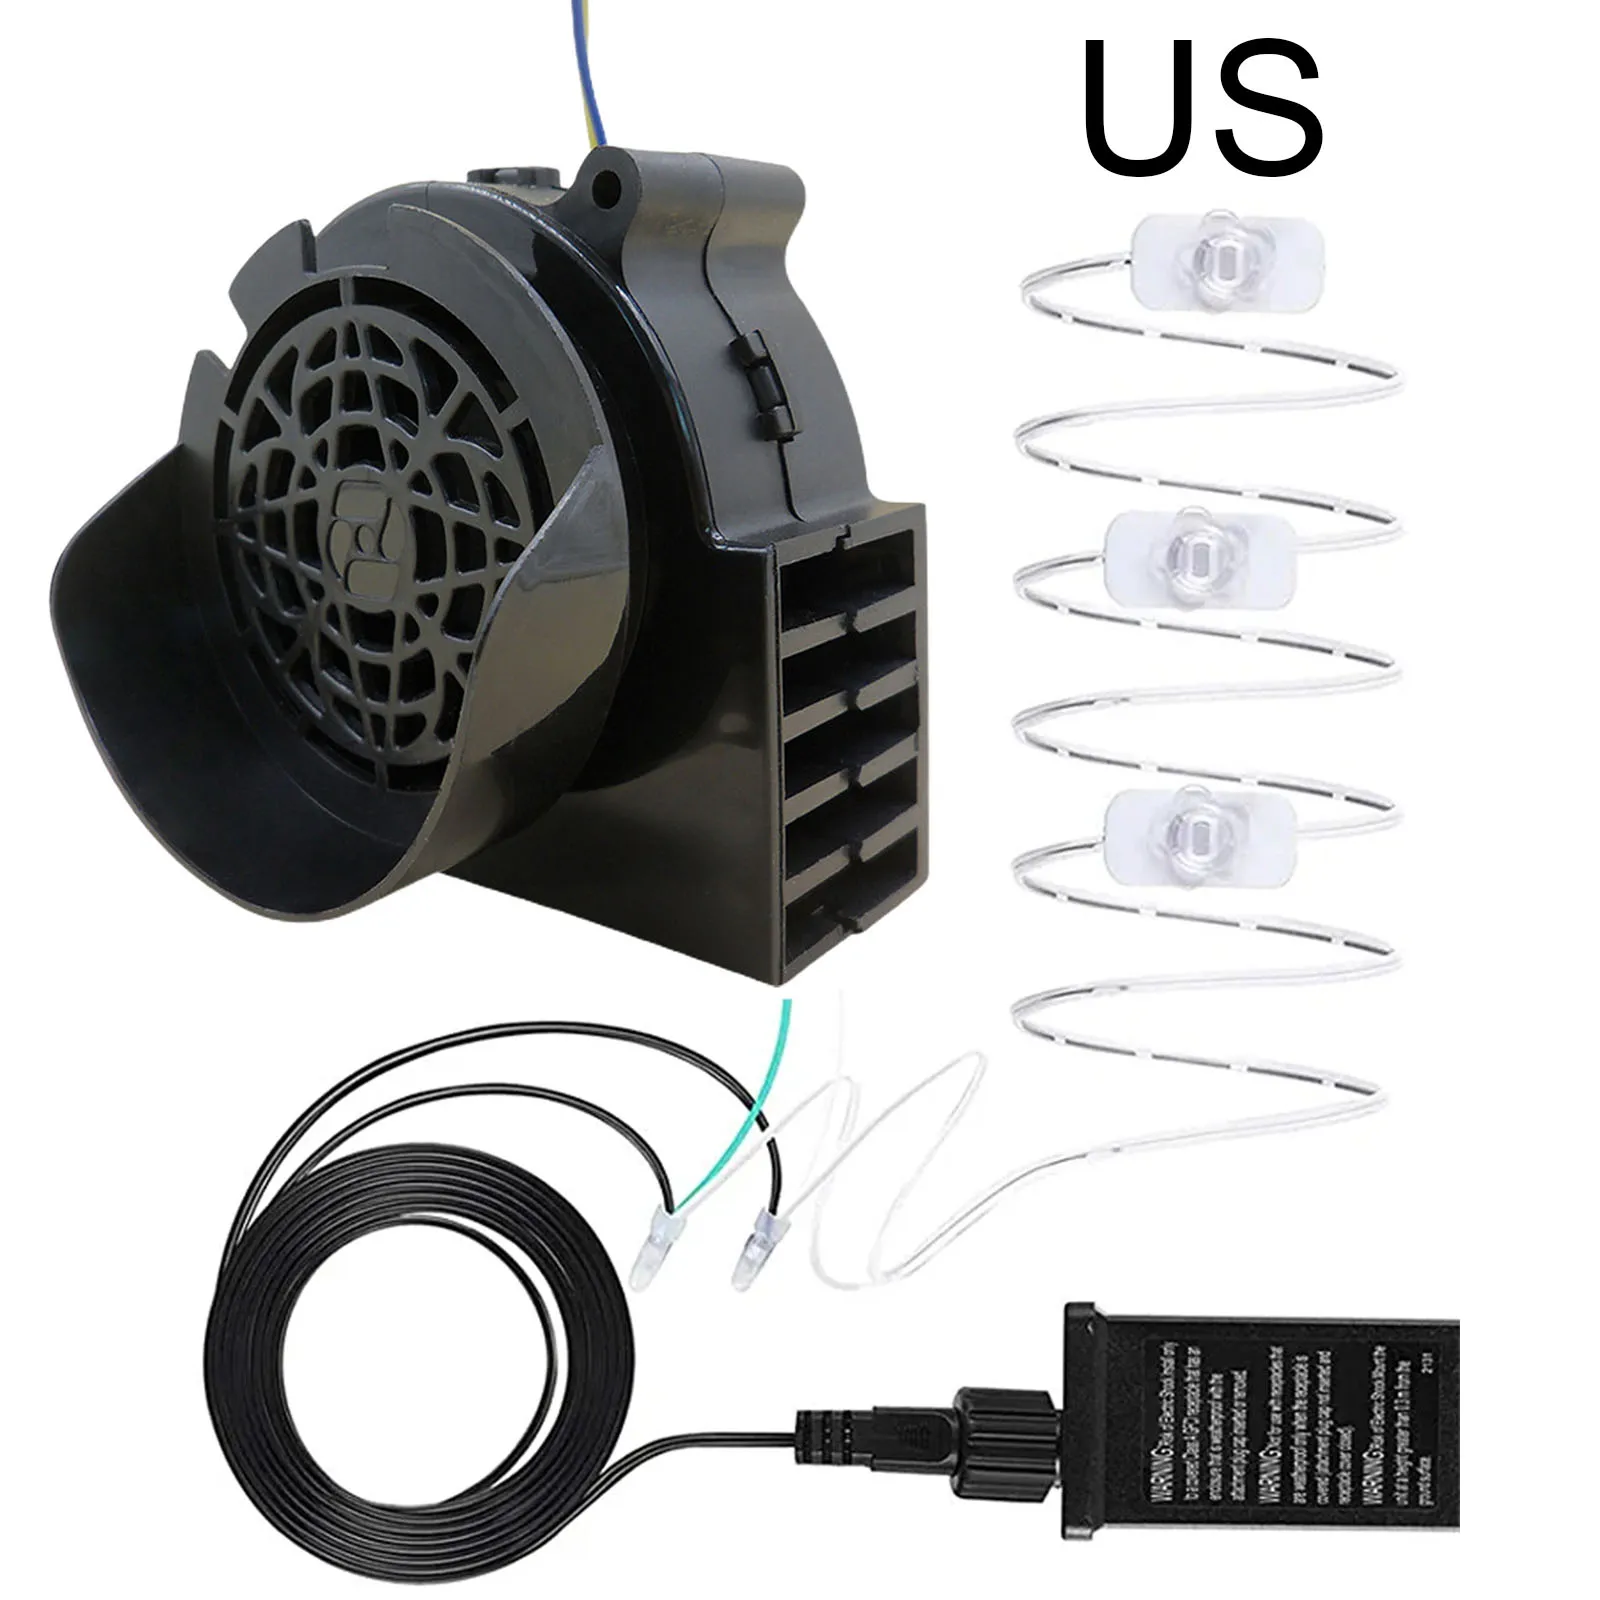 

2221 1Set 12V 0.5A Fan Blower Motor With 3 LEDs Lig, For Garden Yard Shapes Inflatables Decor Replacement Air Blower